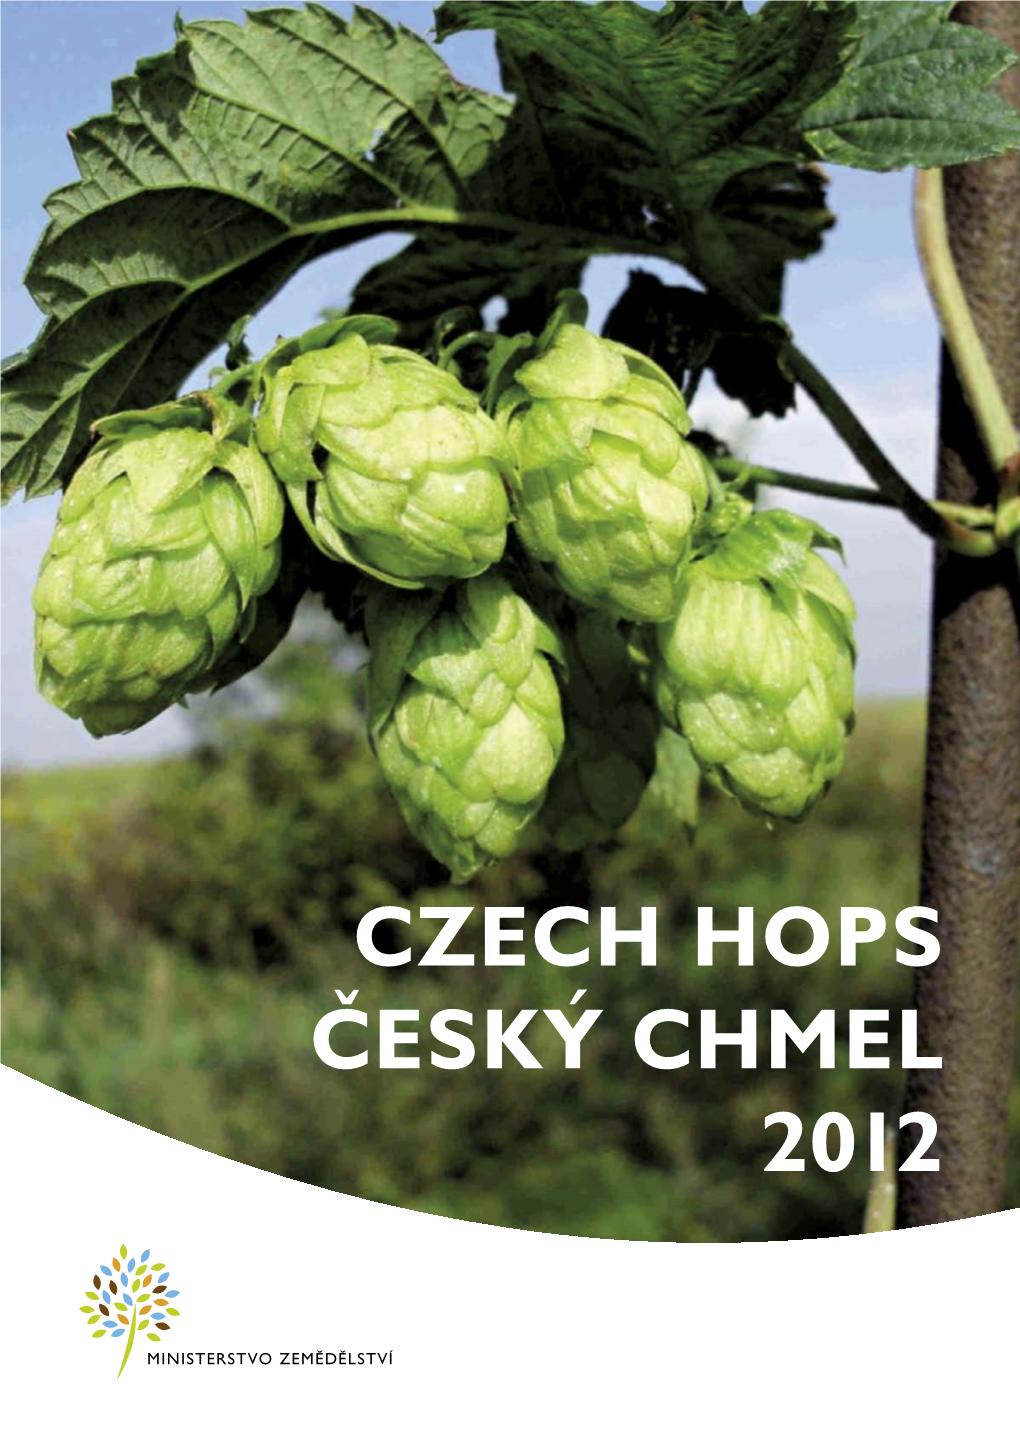 Czech Hops Český Chmel 2012 Published by the Ministry of Agriculture of the Czech Republic in Cooperation with the Hop Growers Union of the Czech Republic